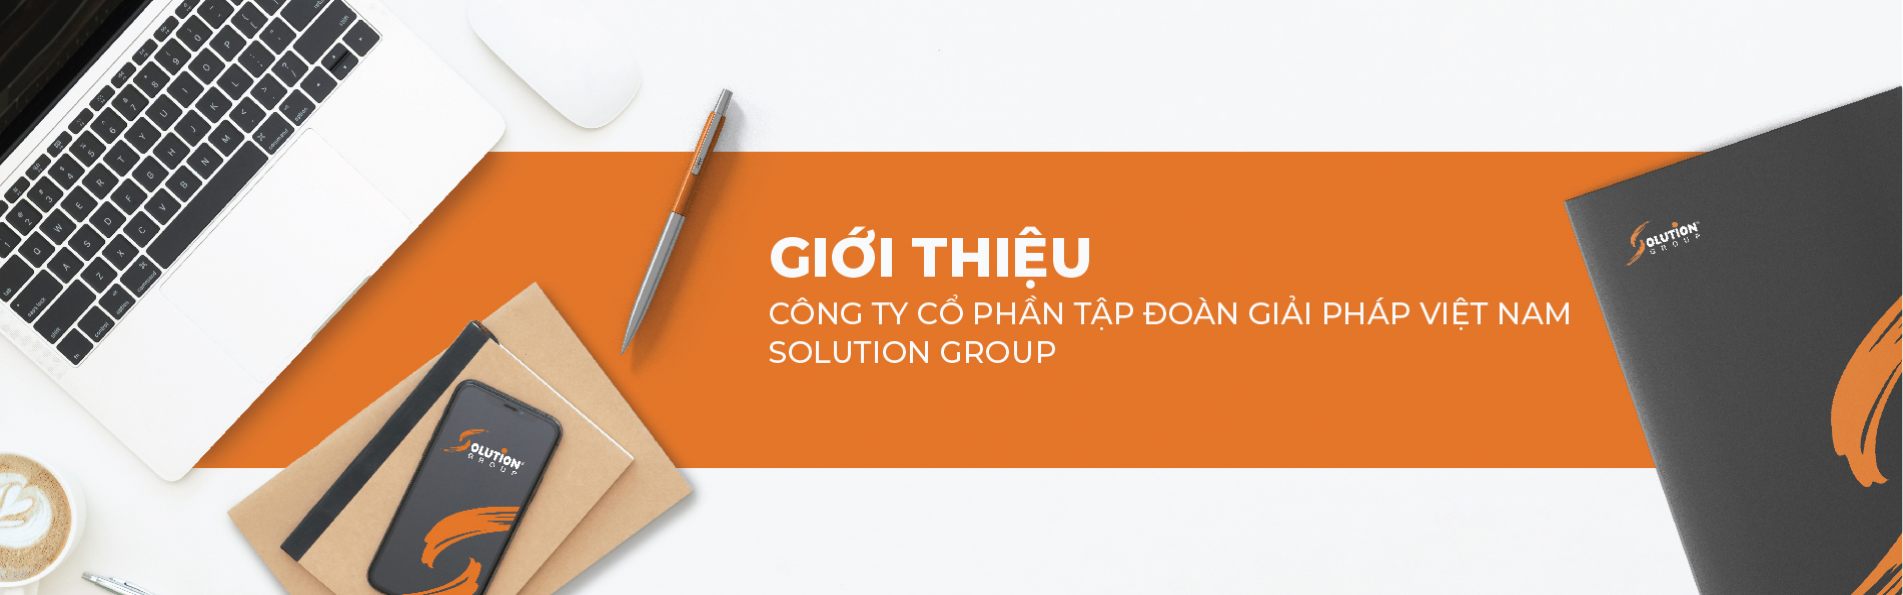 Về Solution Group